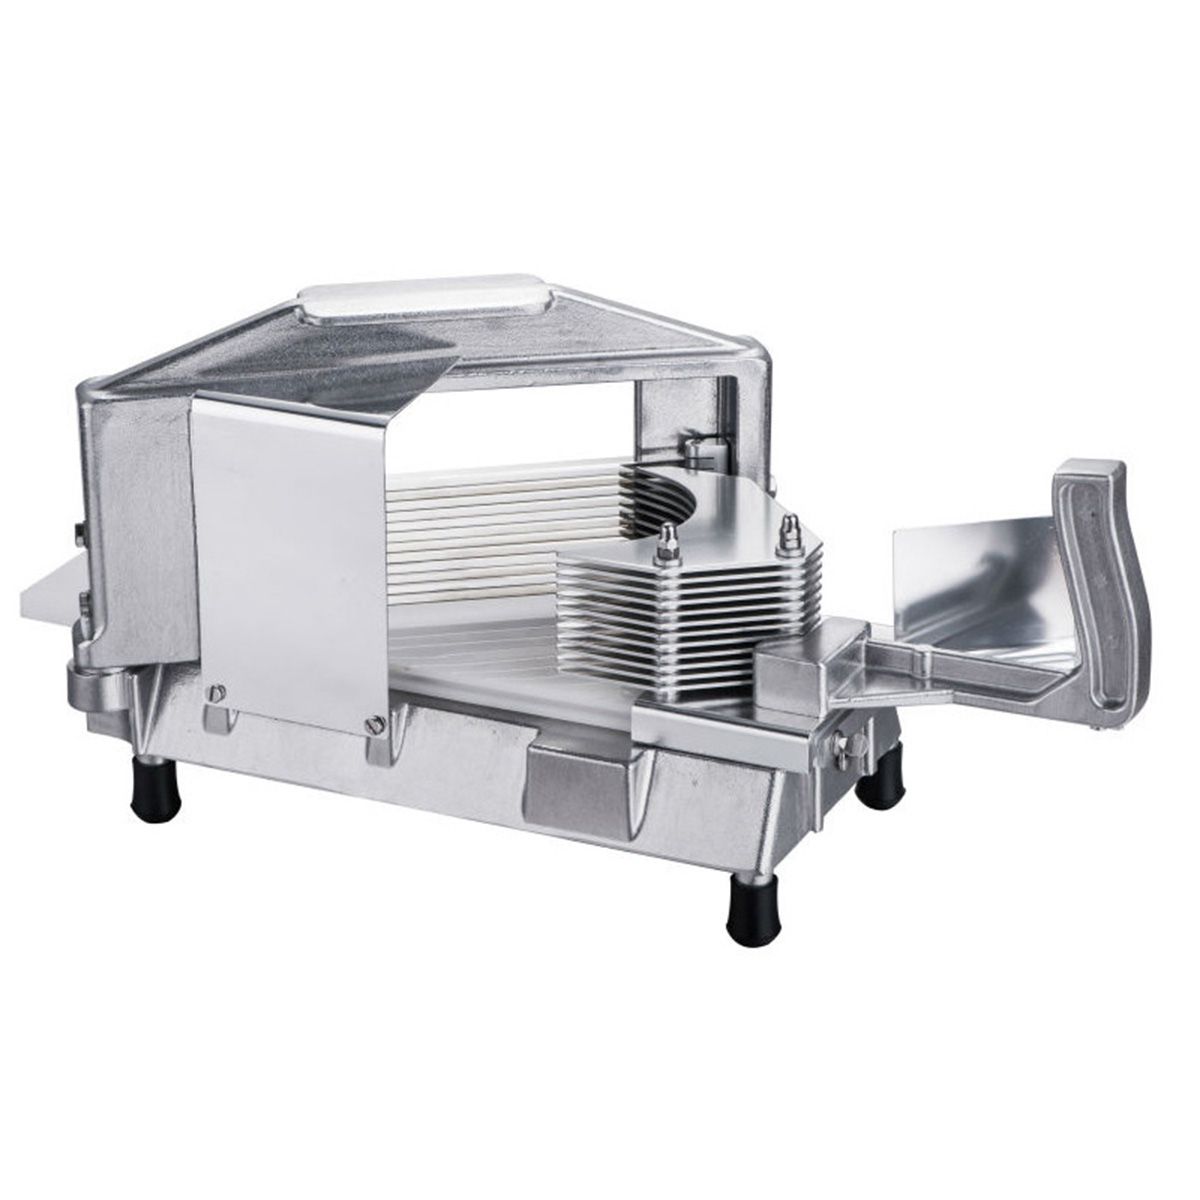 Commercial-Tomato-Slicer-Onion-Slicing-Cutter-Manual-Vegetable-Cutting-Machine-1522669